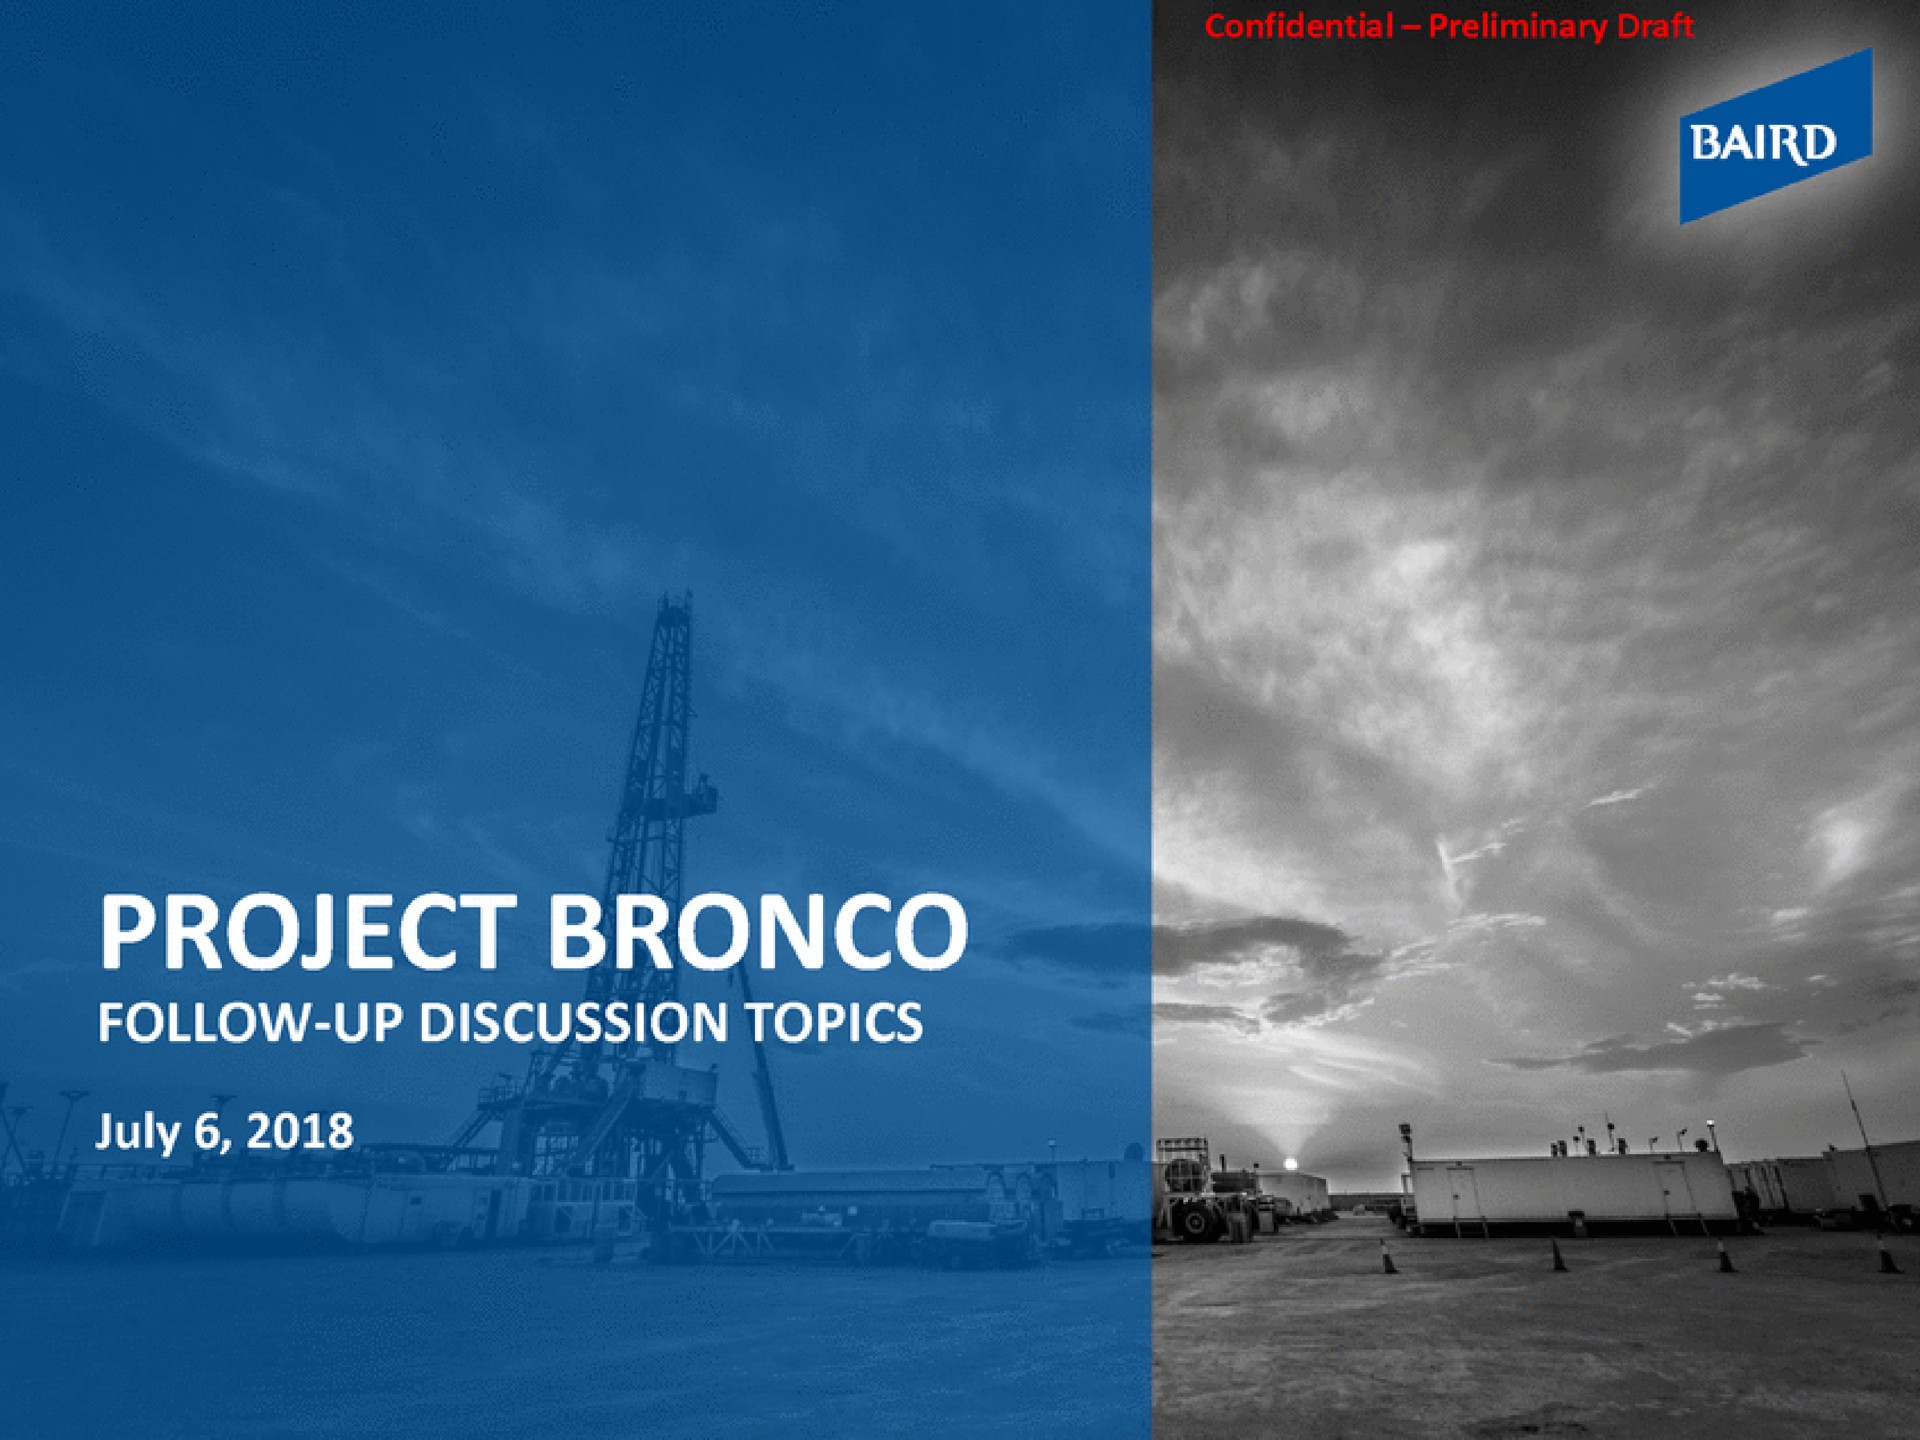 project bronco follow up discussion topics | Baird